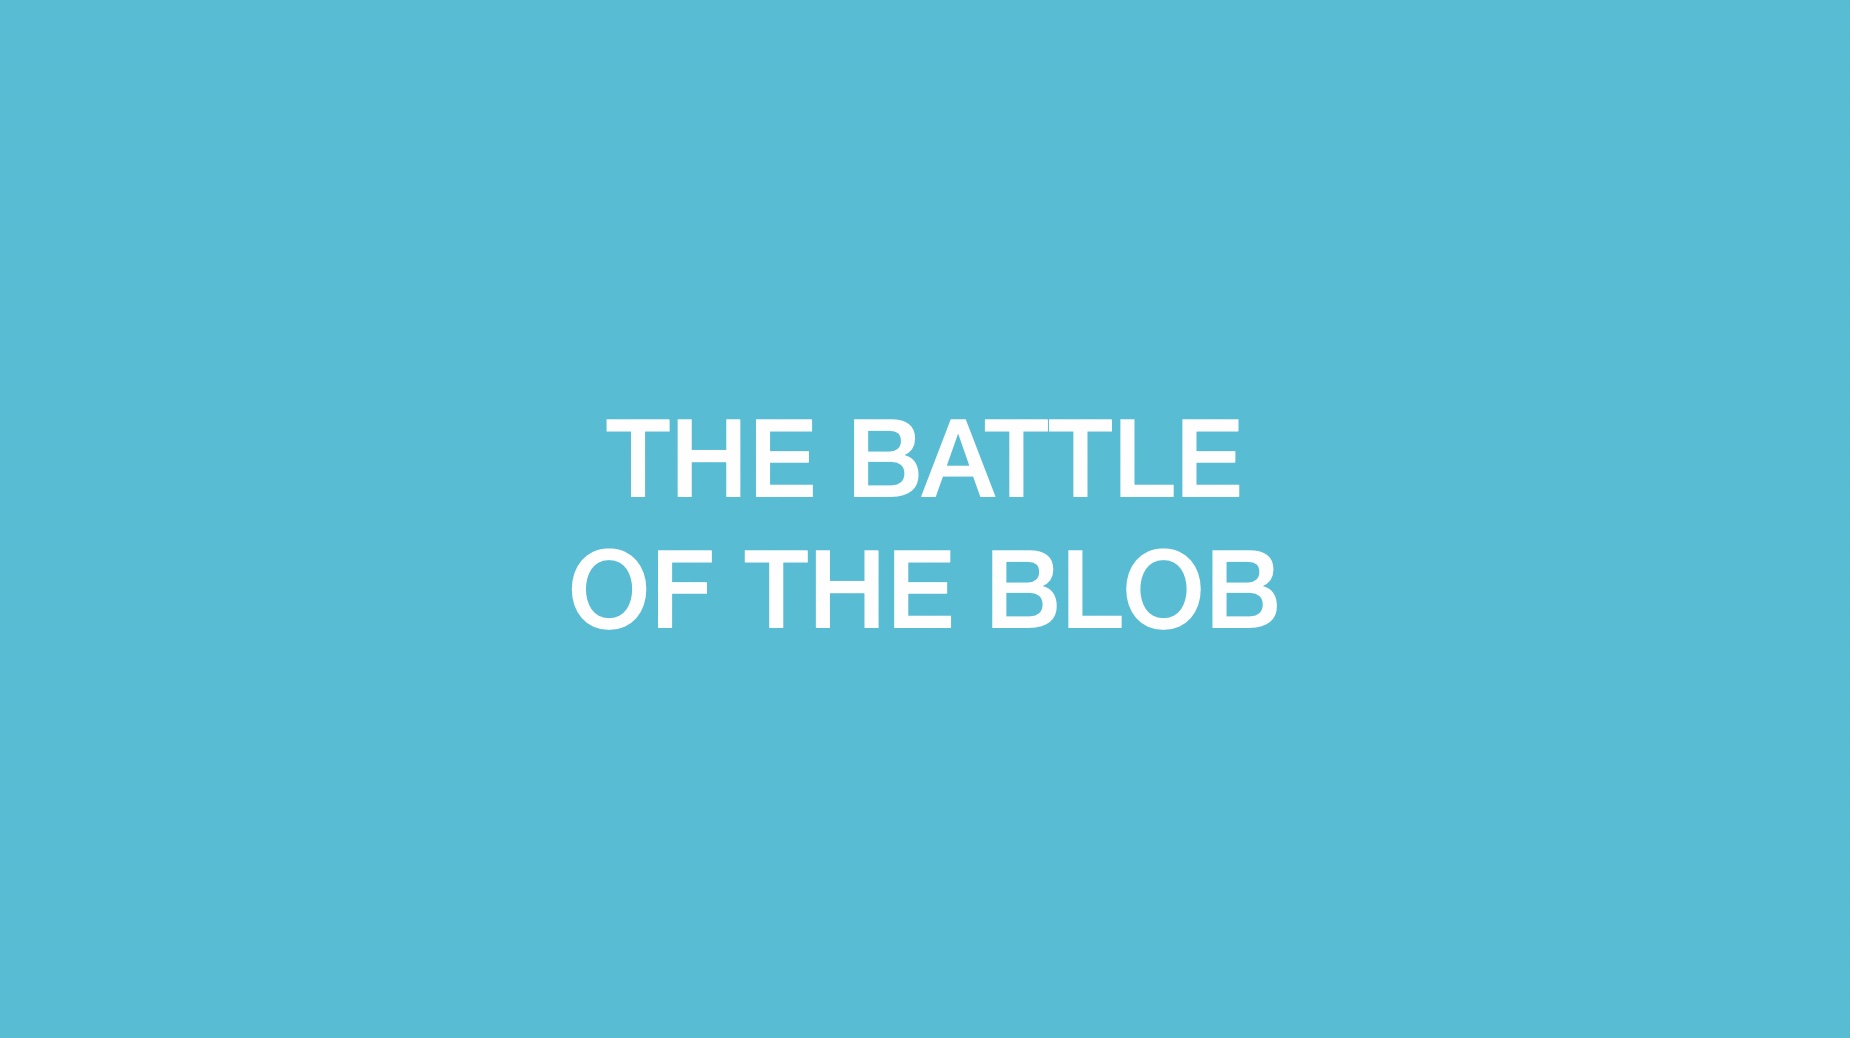 The Battle of the Blob image